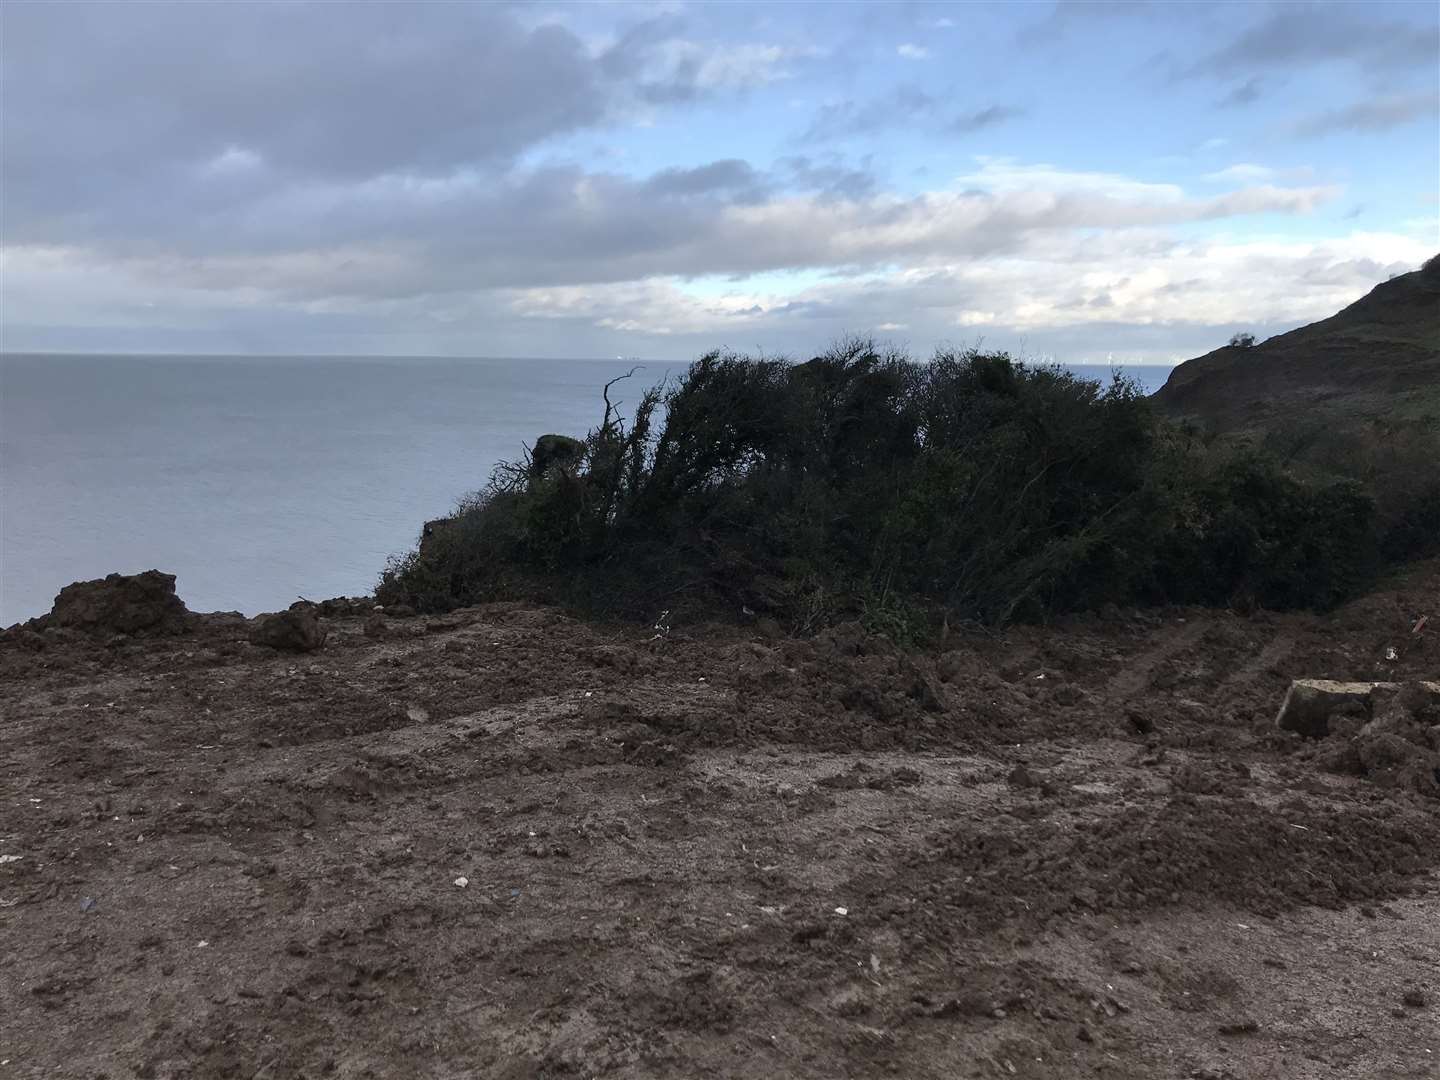 The edge of the cliff where Cliffhanger used to be, off Surf Crescent in Eastchurch now